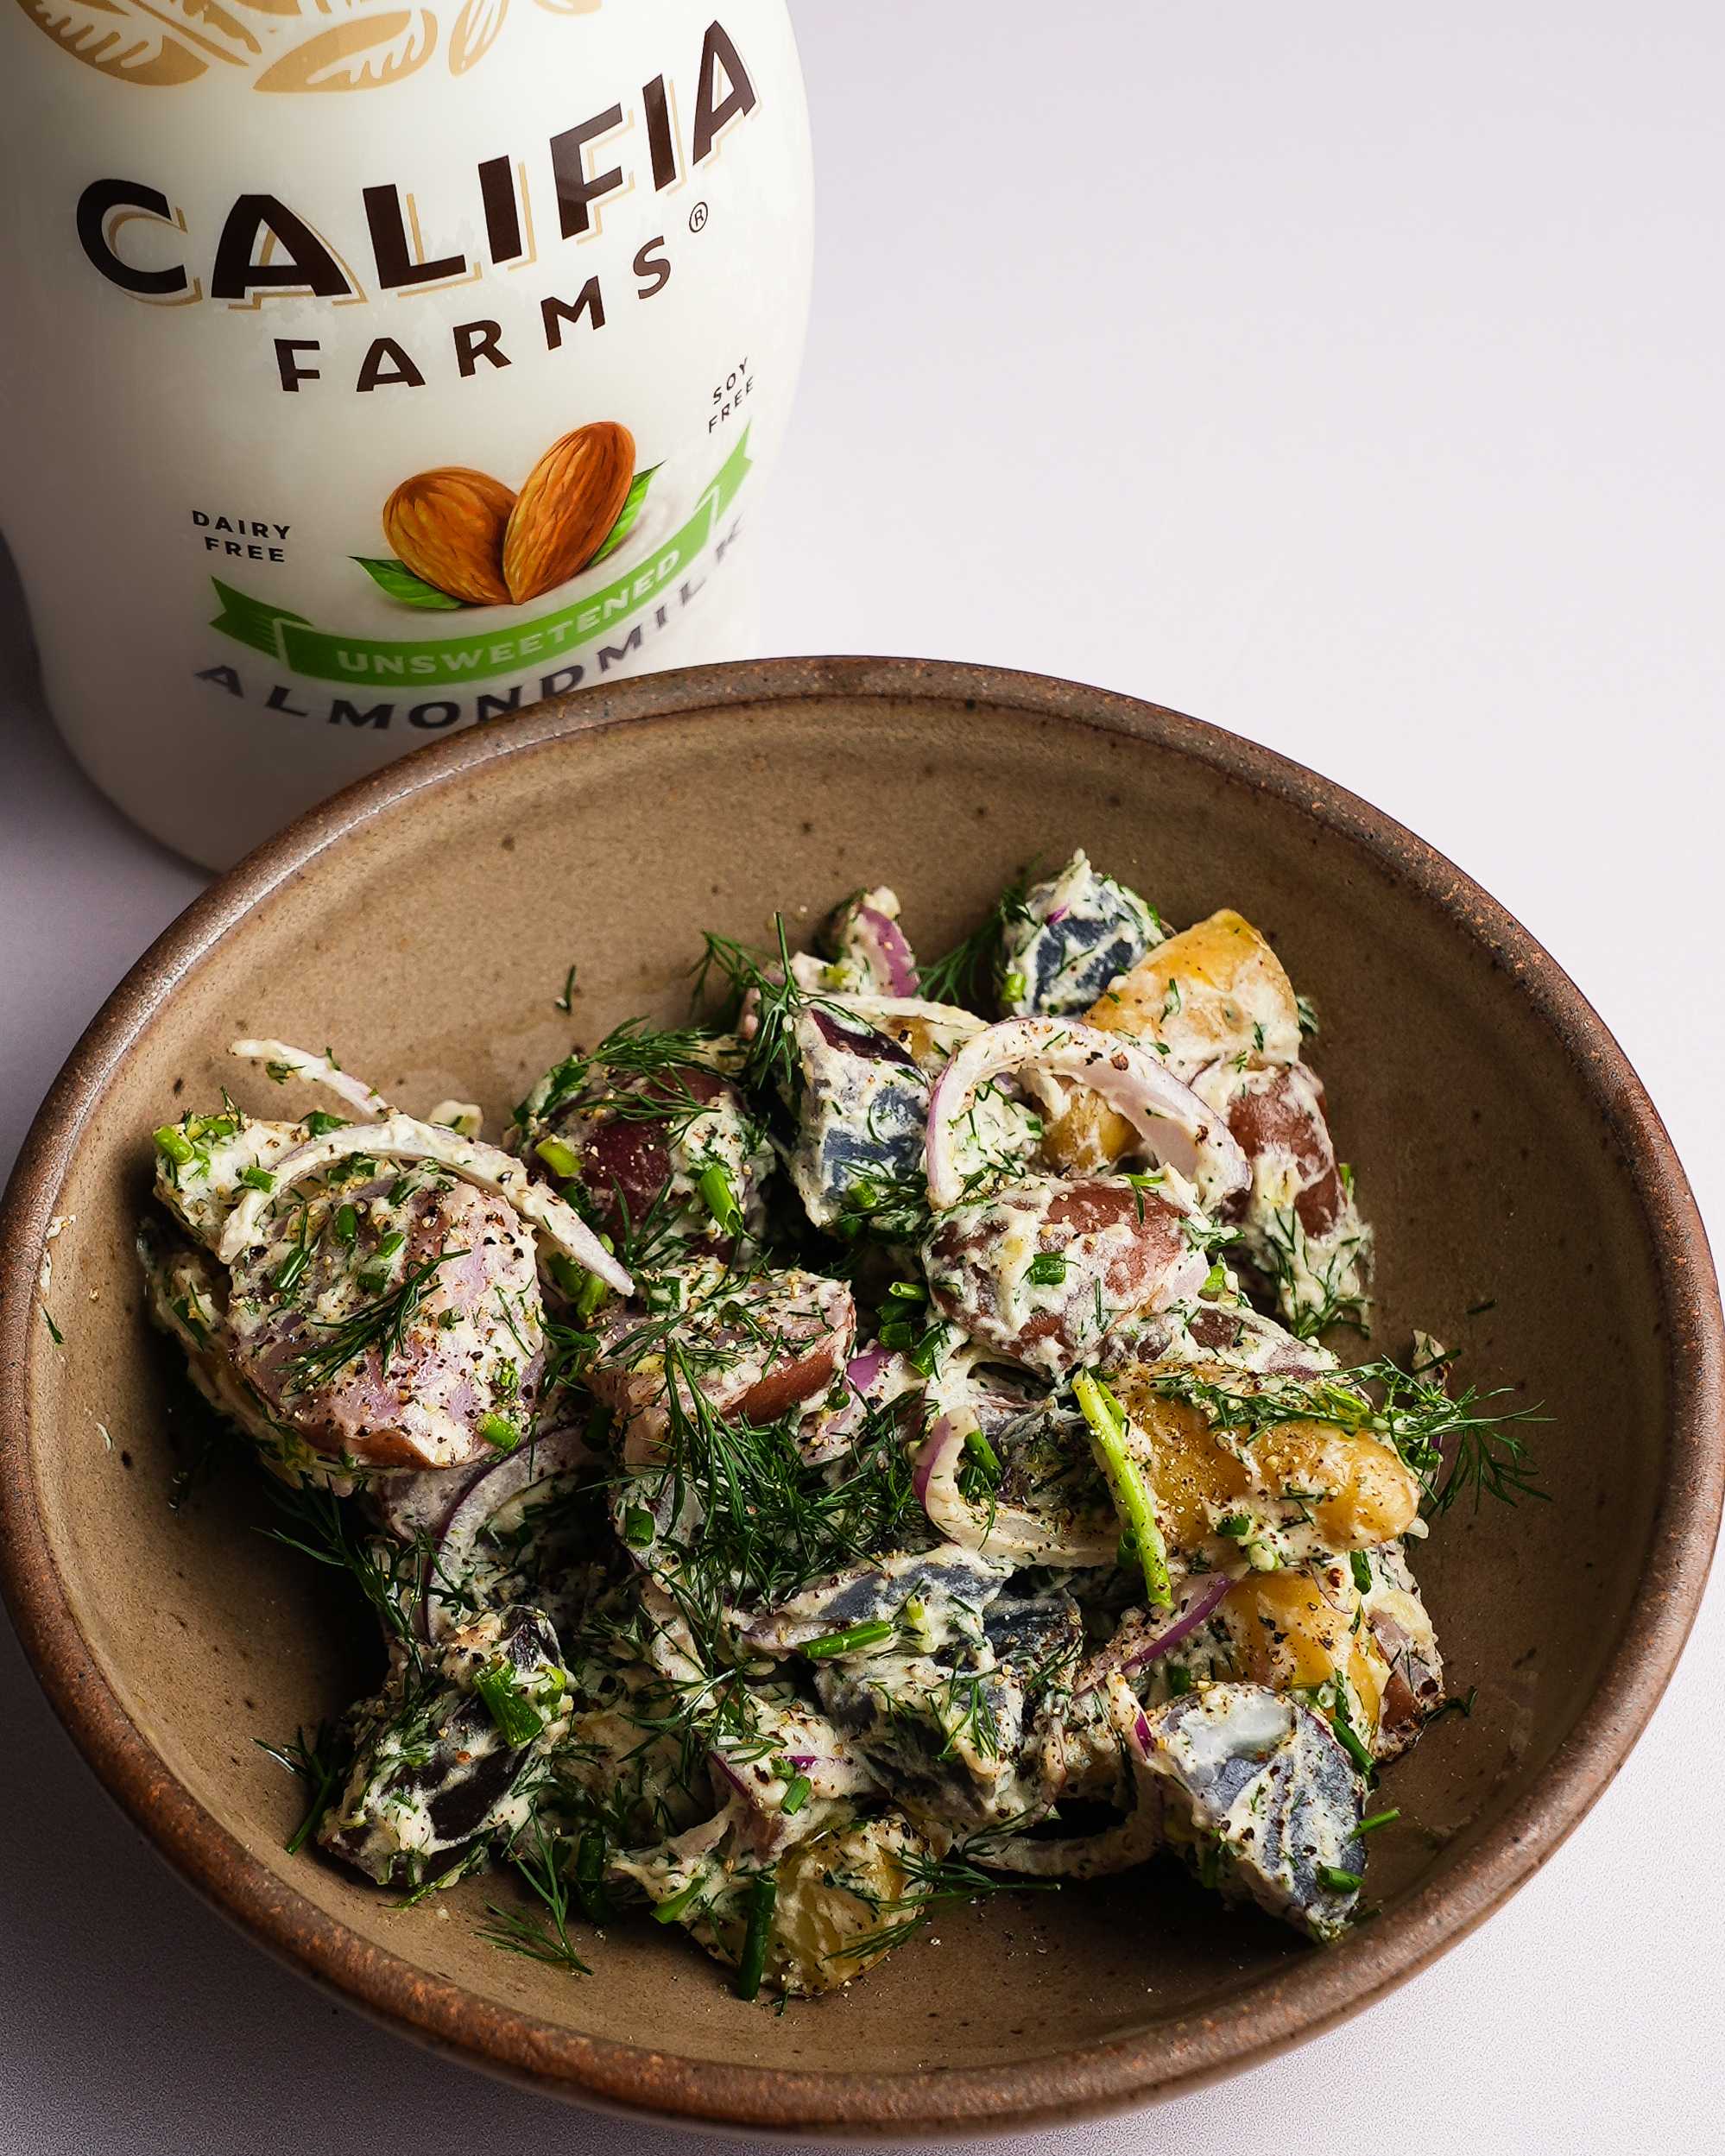 A bowl of potato salad sits in the center of the image, with Califia Farms Unsweetened Almondmilk behind.